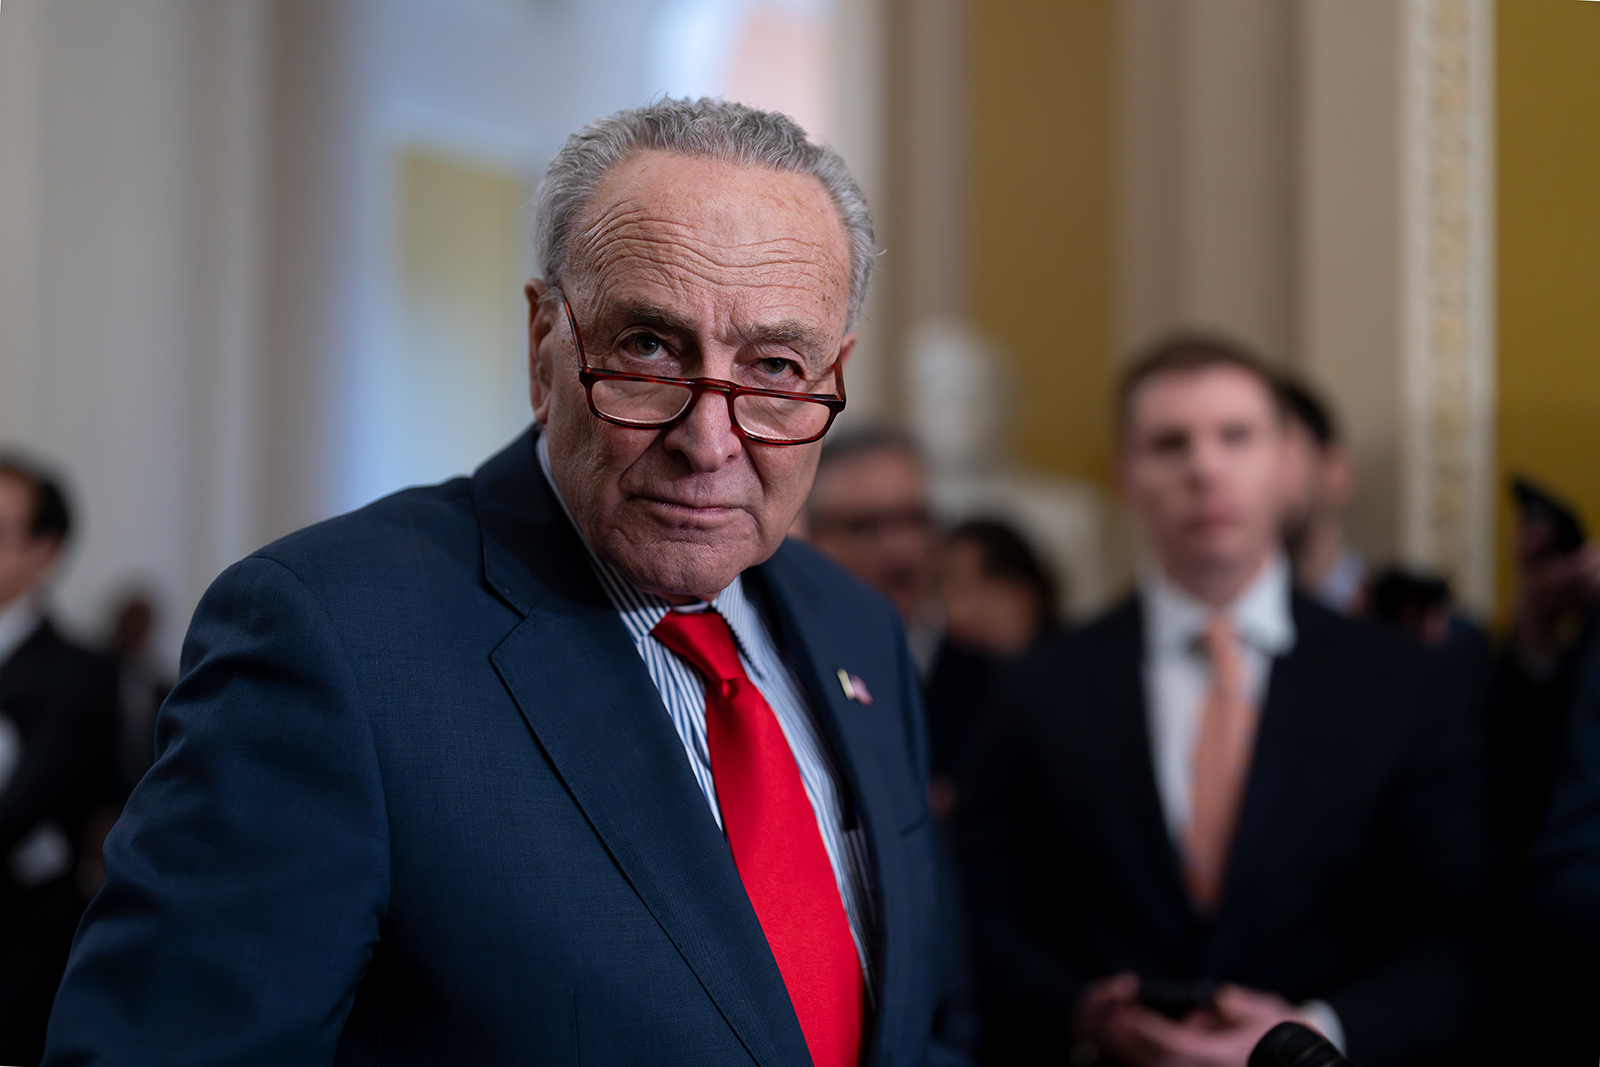 Chuck Schumer speaks to reporters at the Capitol in Washington, on March 12.